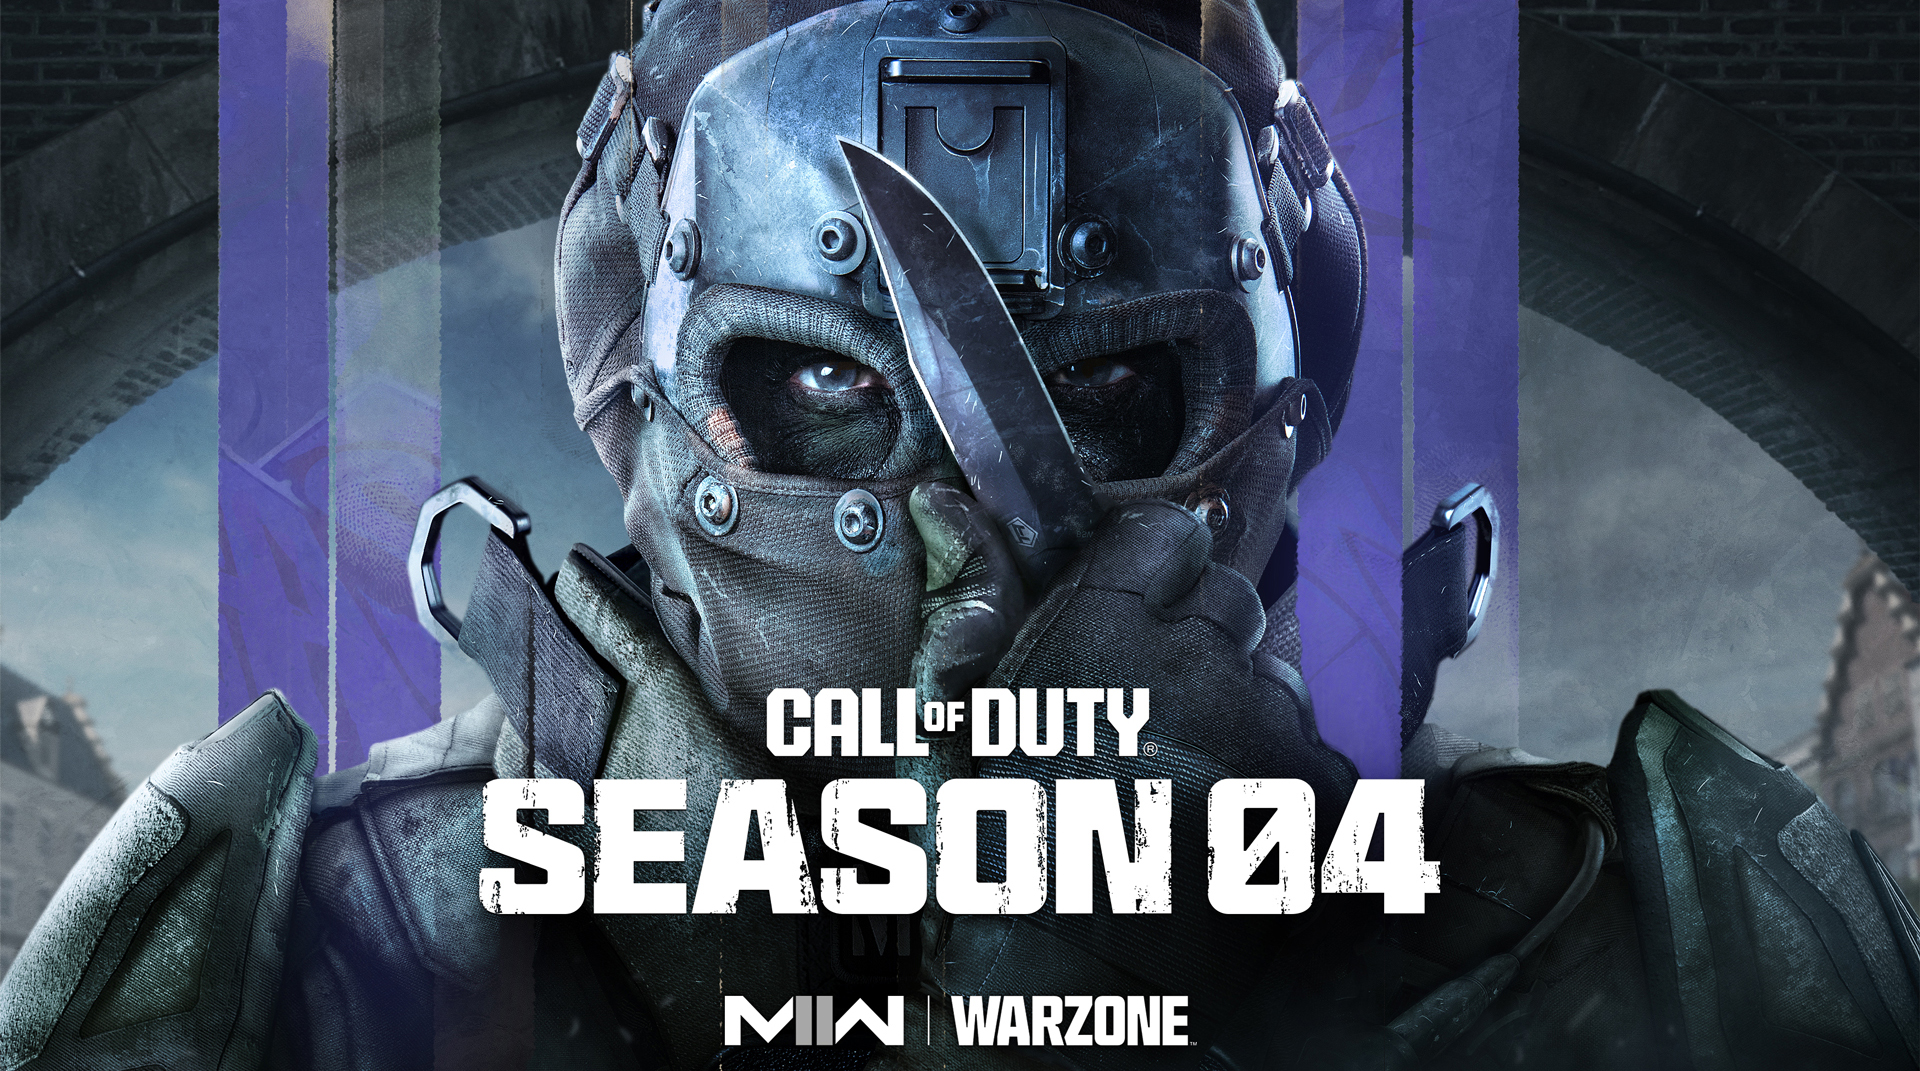 Call of Duty Modern Warfare 2 release date and starring characters